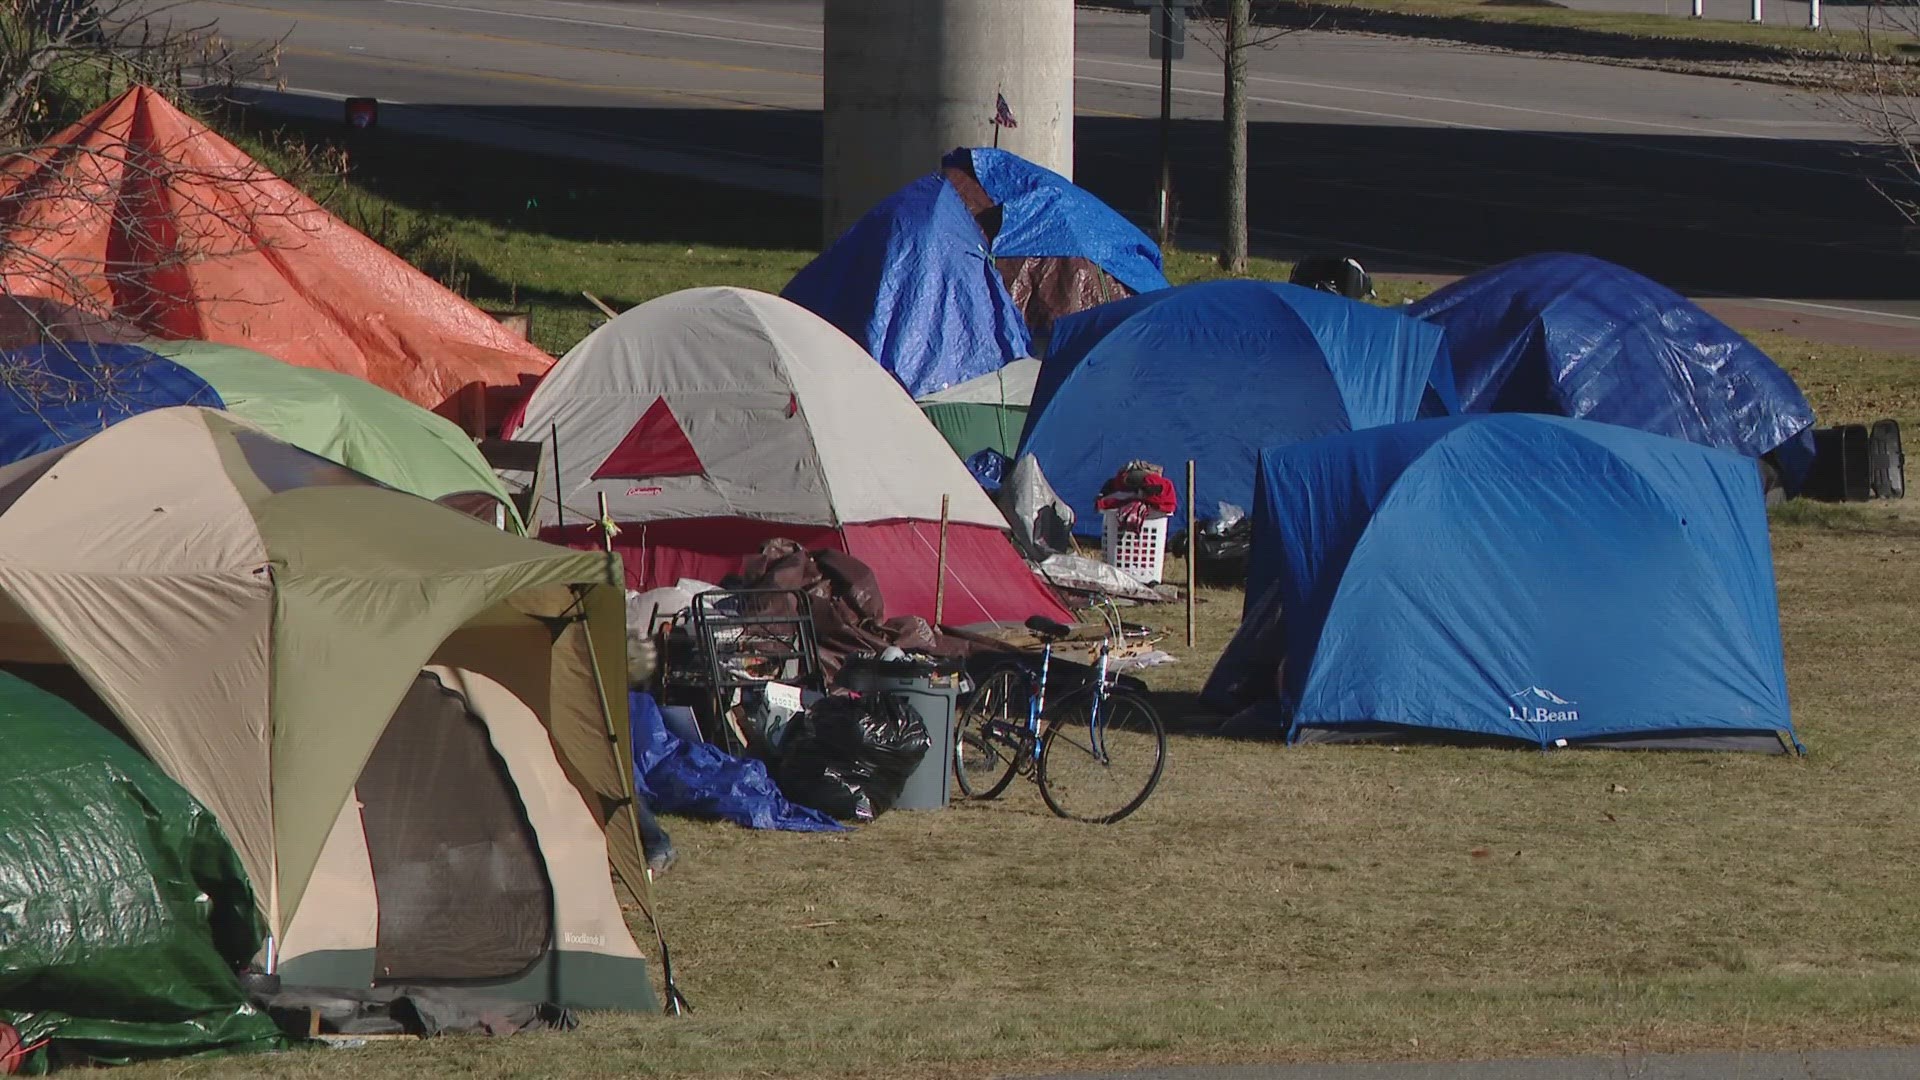 The order would have allowed camping in certain public areas in the city through April 30 next year.